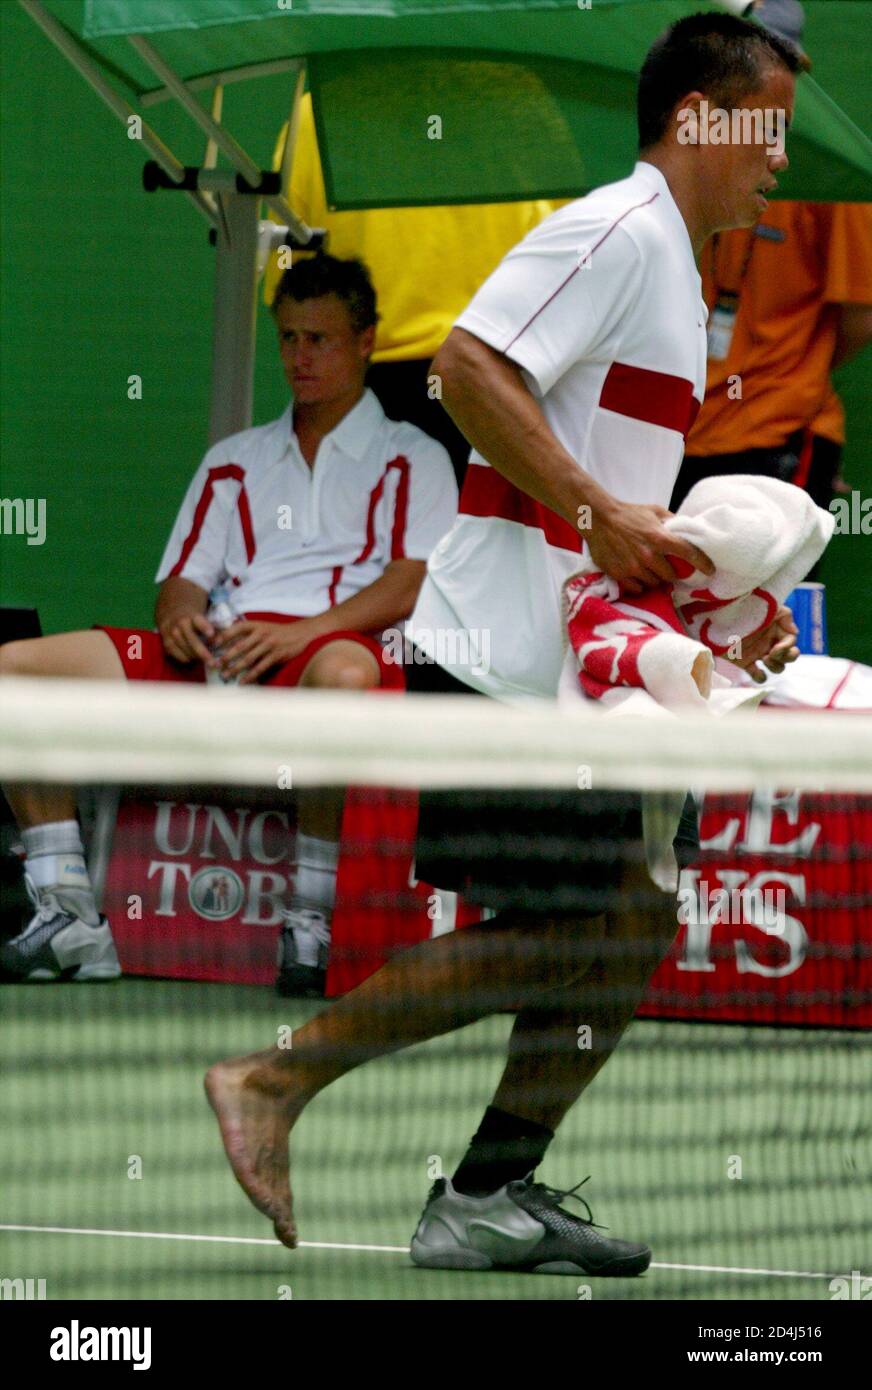 AUSTRALIA'S LLEYTON HEWITT SITS IN CHAIR AS CECIL MAMIIT FROM THE U.S.  HOBBLES PAST AT THE AUSTRALIAN OPEN IN MELBOURNE. Australia's Lleyton  Hewitt (L) sits in his chair as Cecil Mamiit from